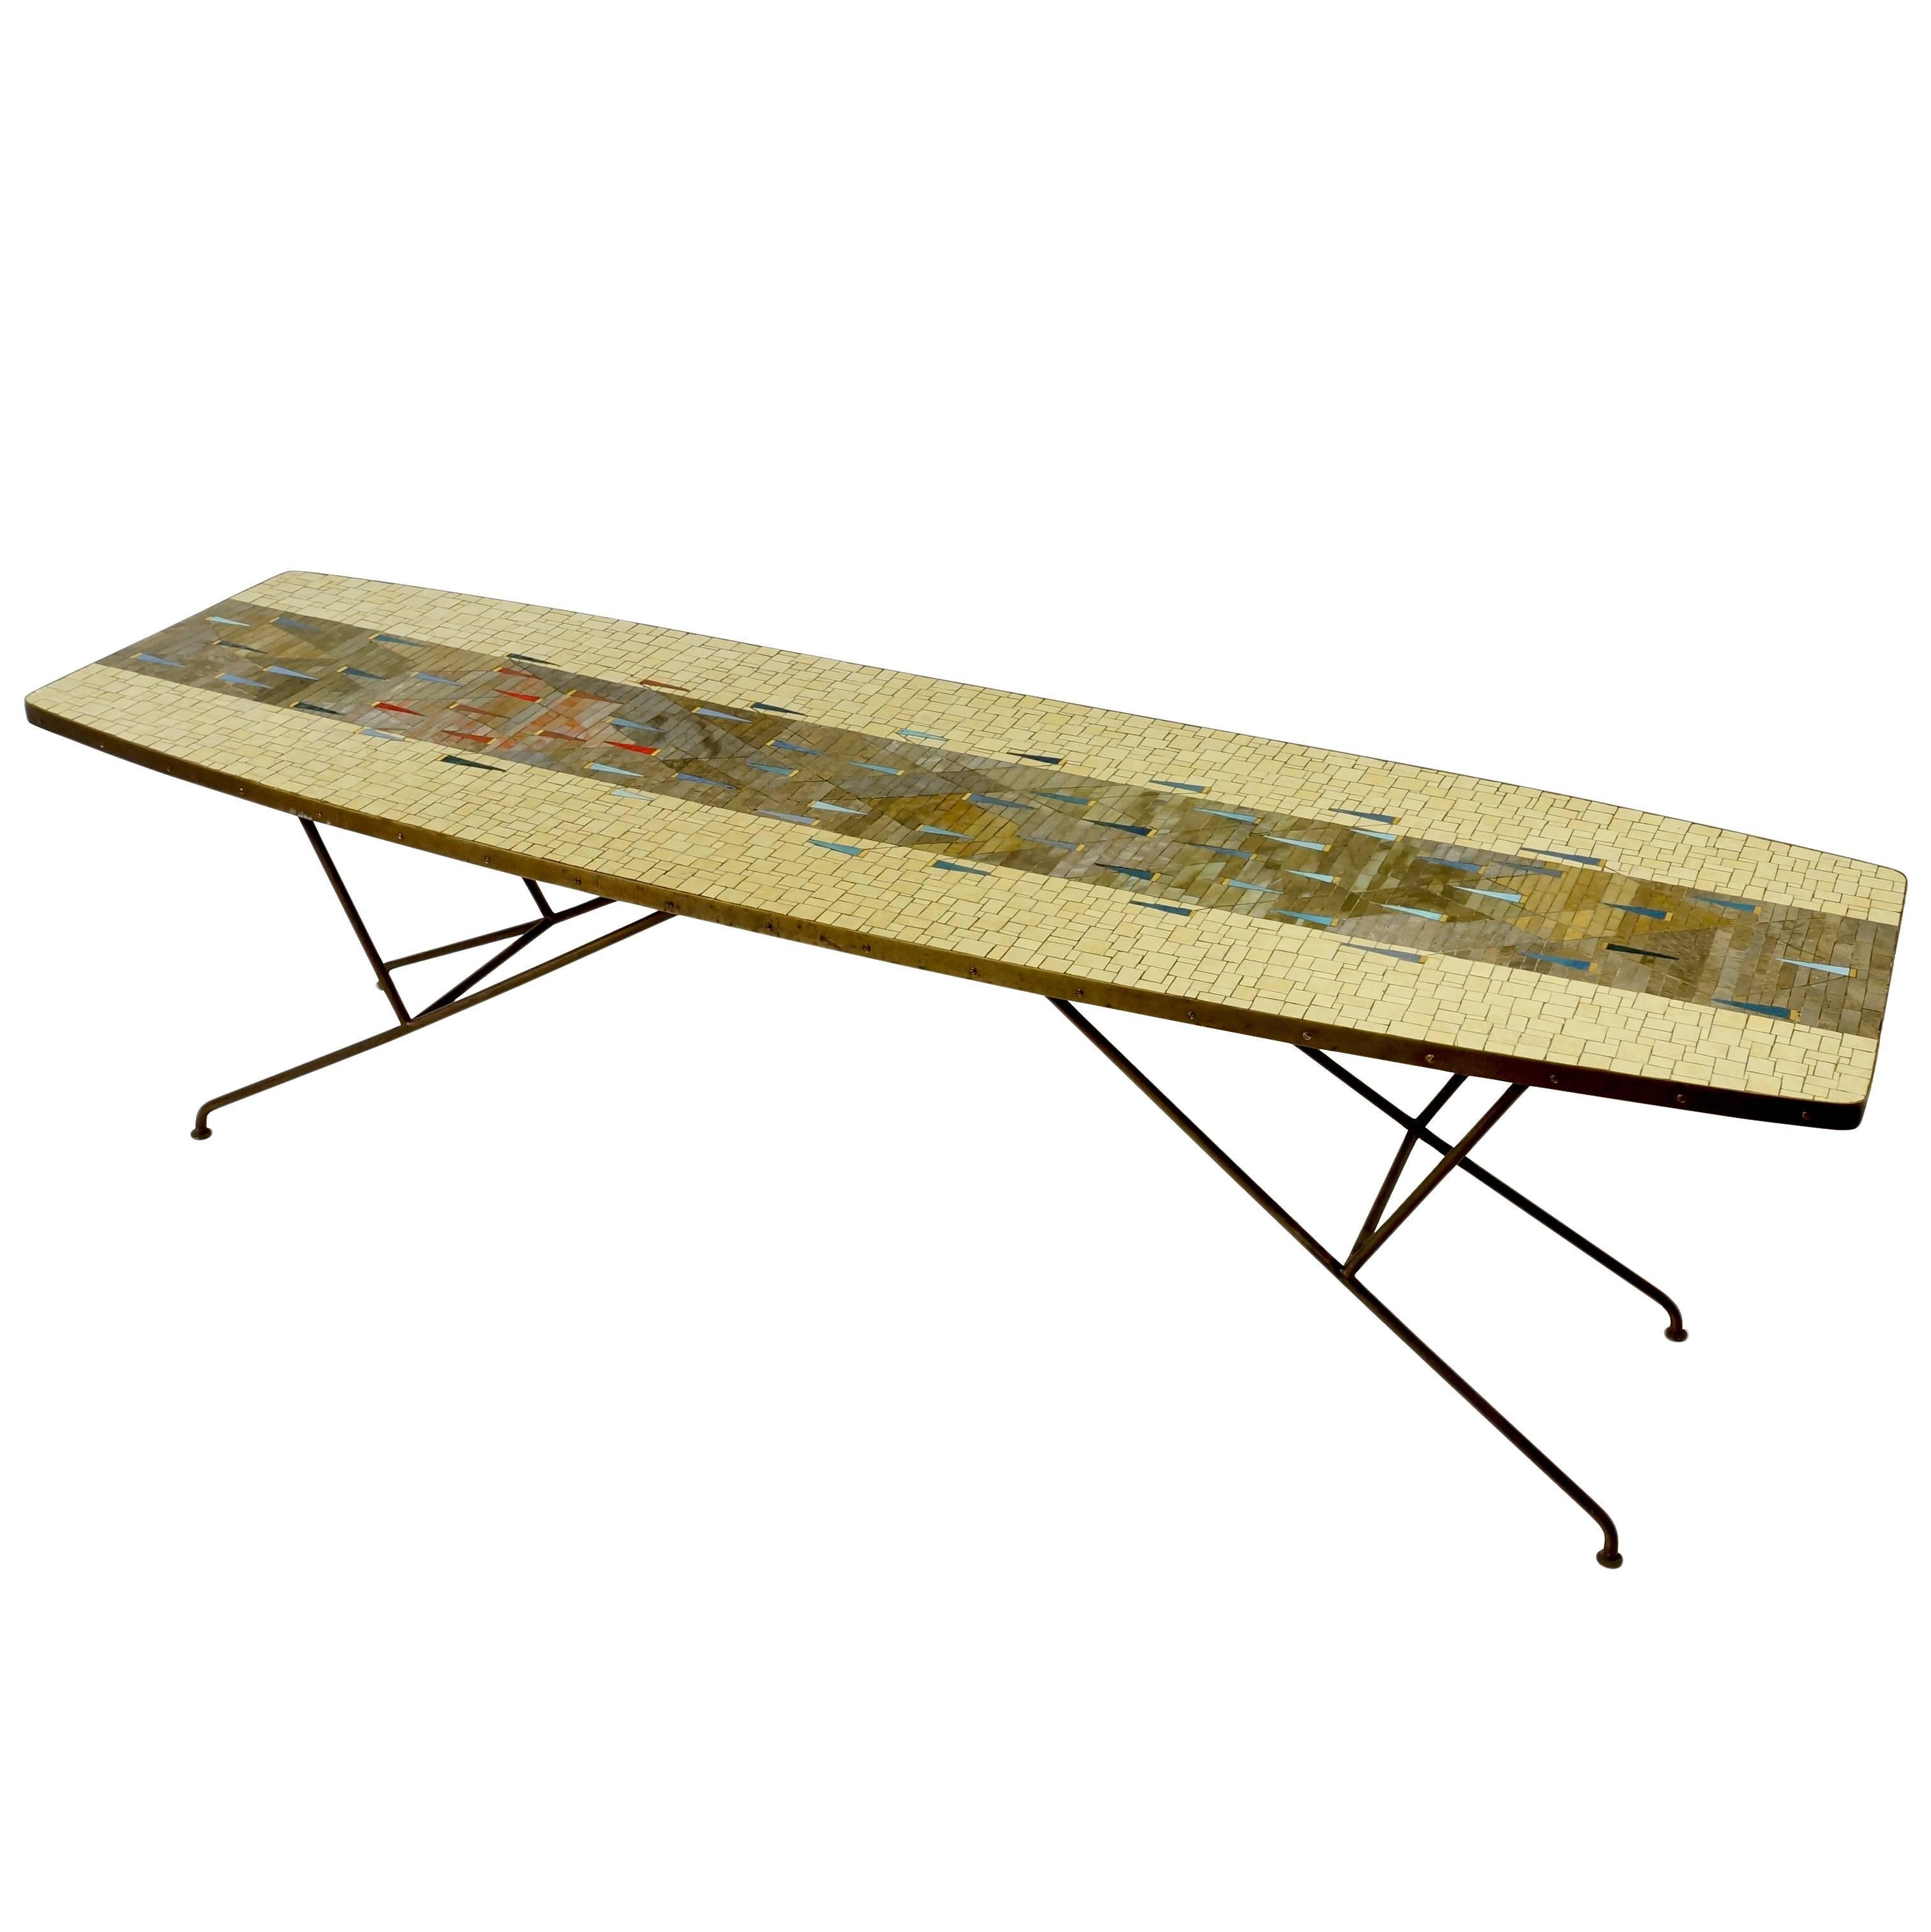 Large Stunning Italian Glass Mosaic Coffee Table, 1950s on Brass Legs For Sale